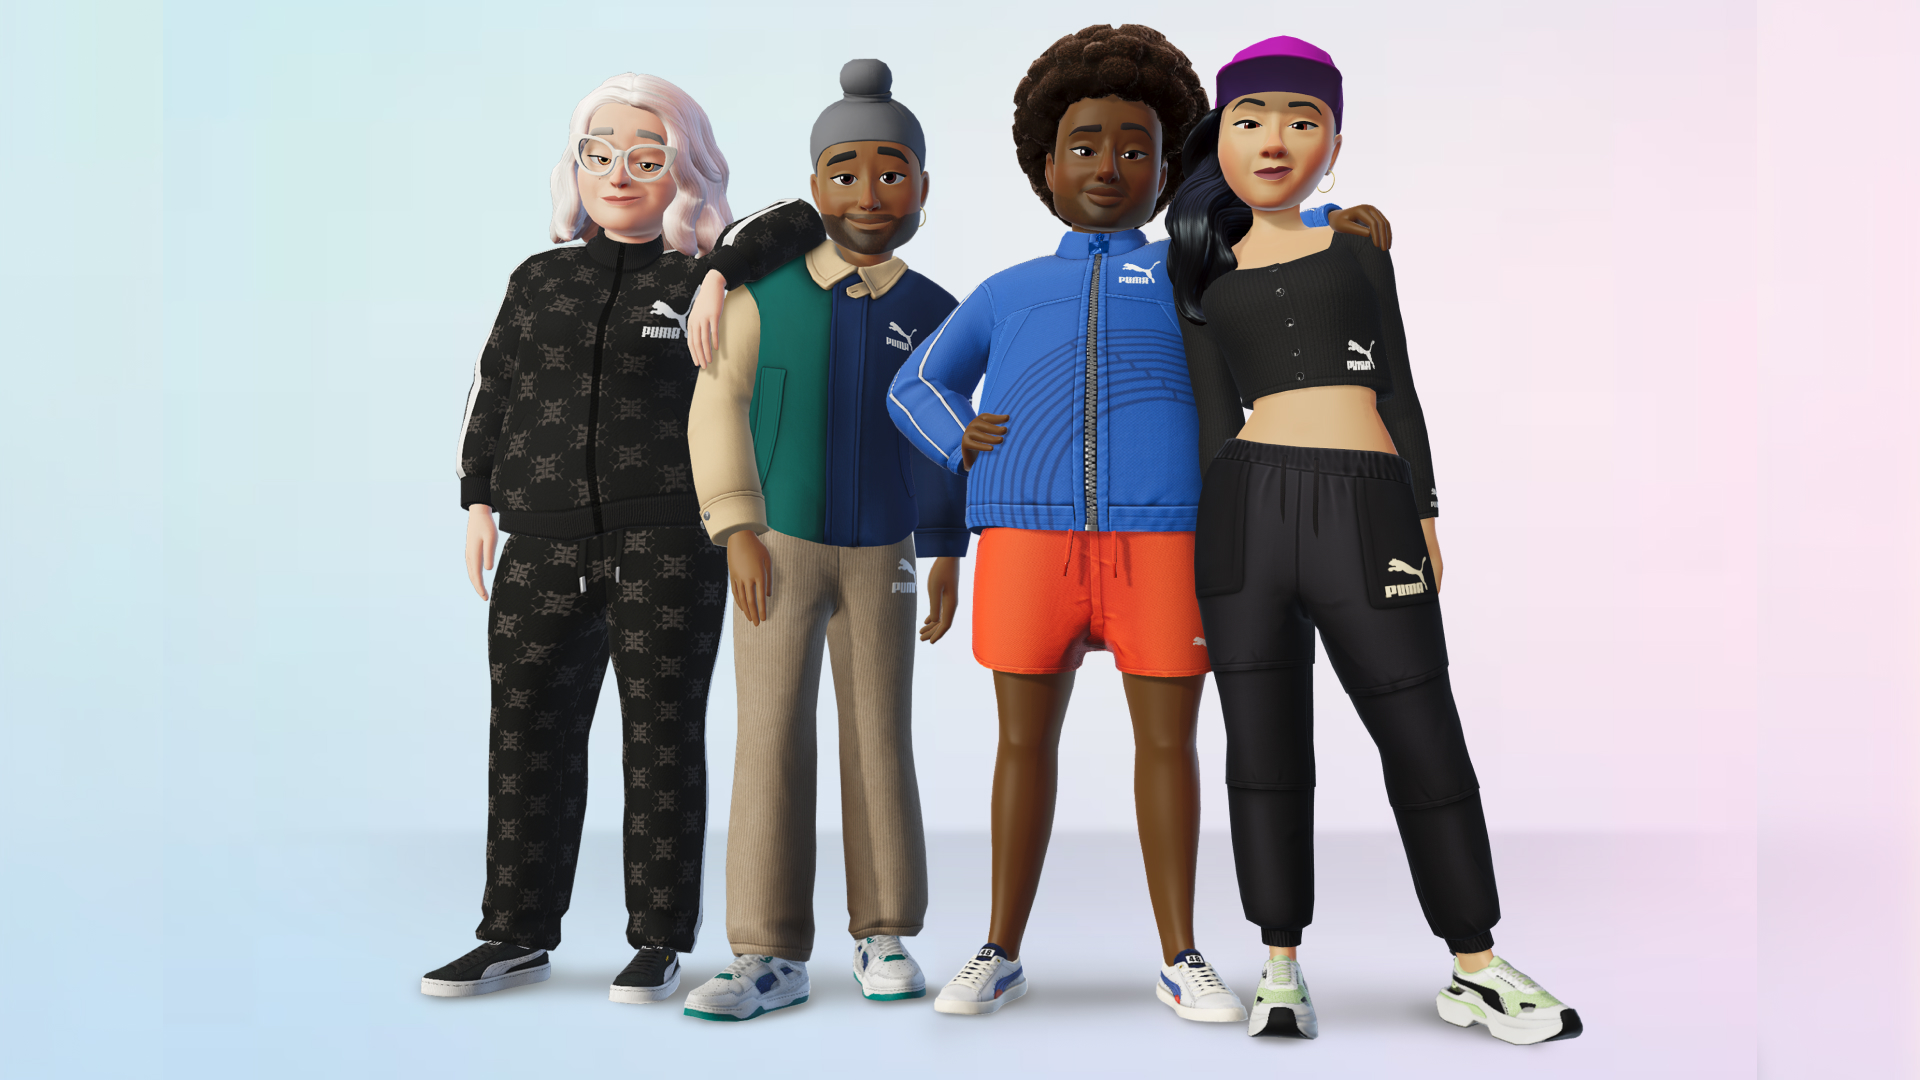 An image of four Meta Avatars dressed in PUMA clothing.